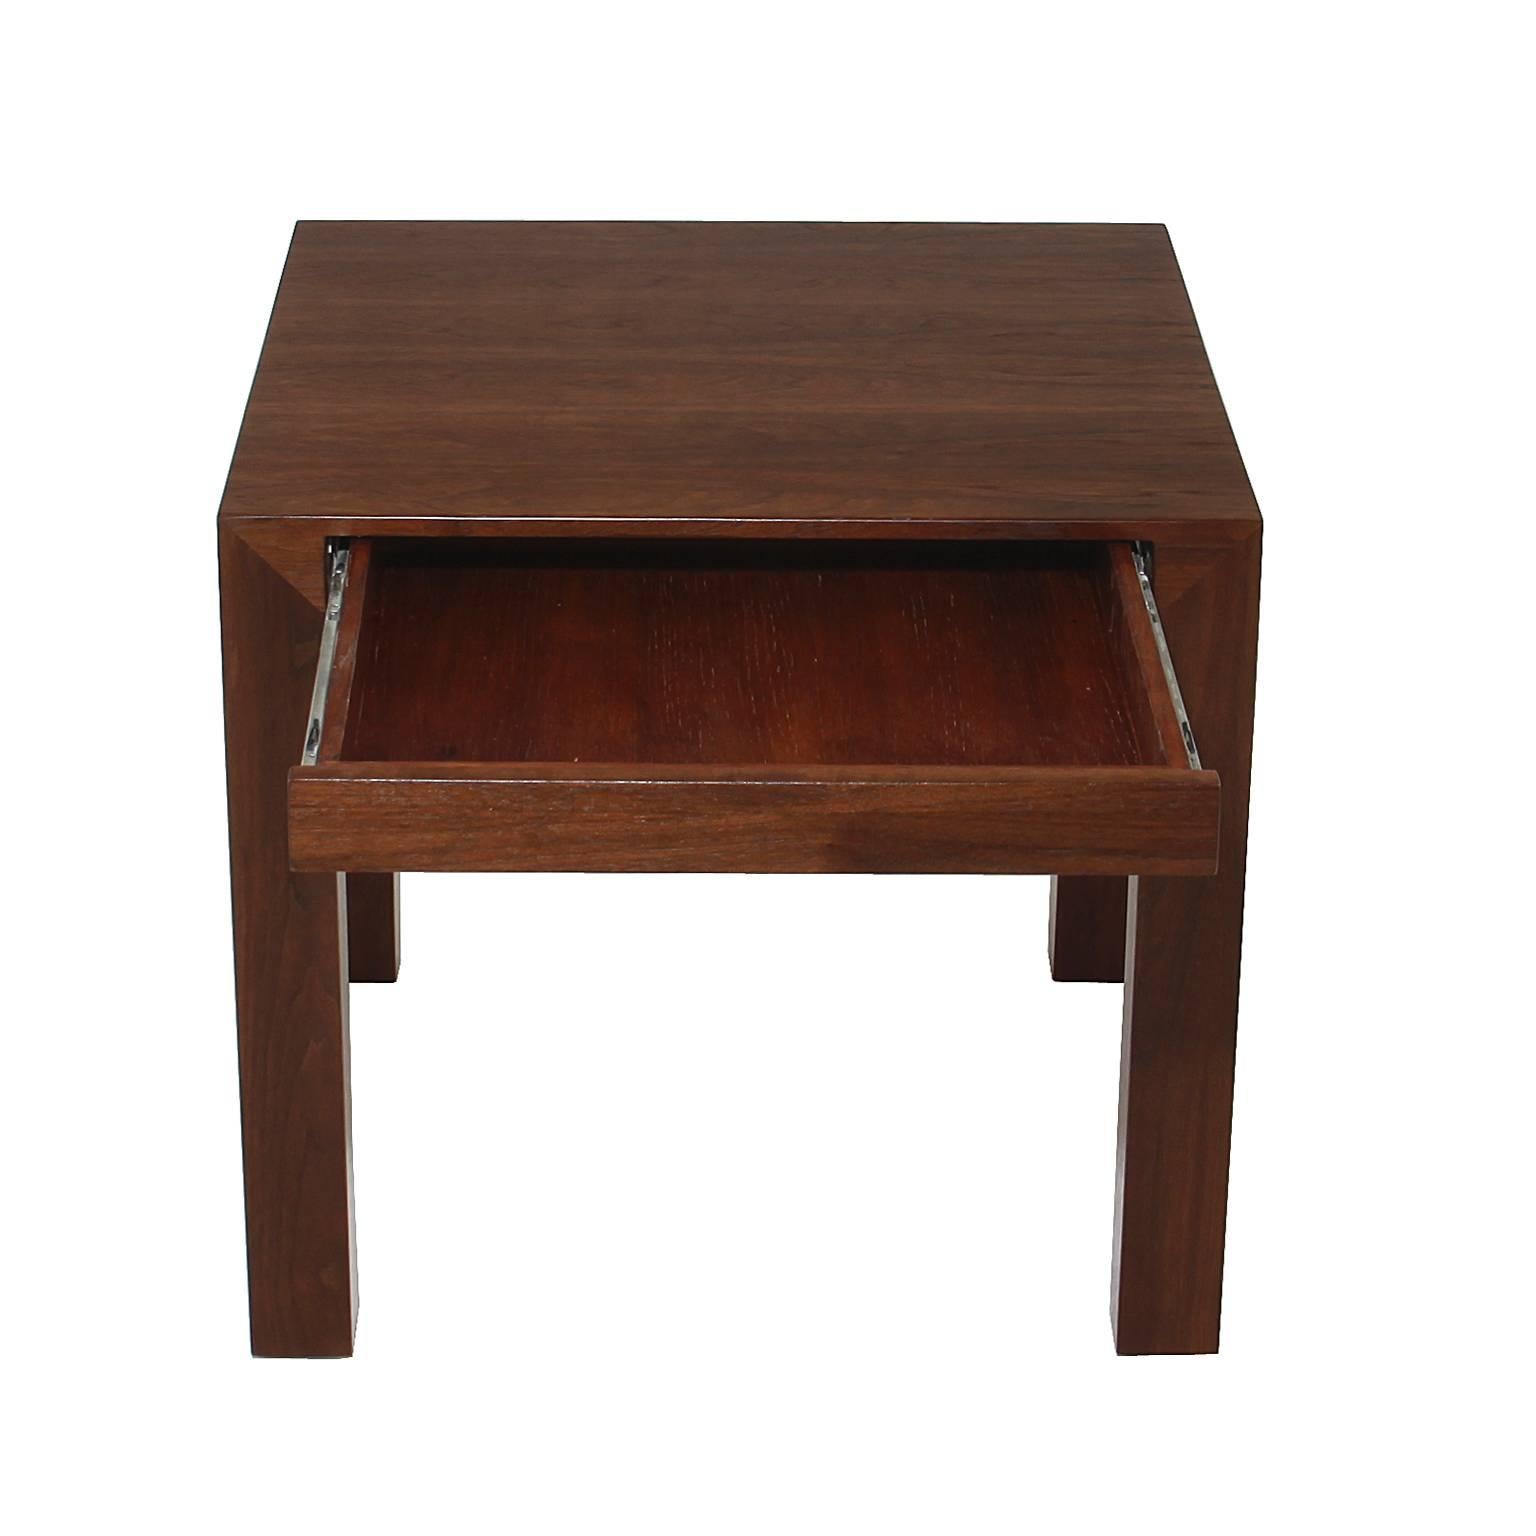 Mid-20th Century Pair of Minimal Walnut Side Tables with Drawers